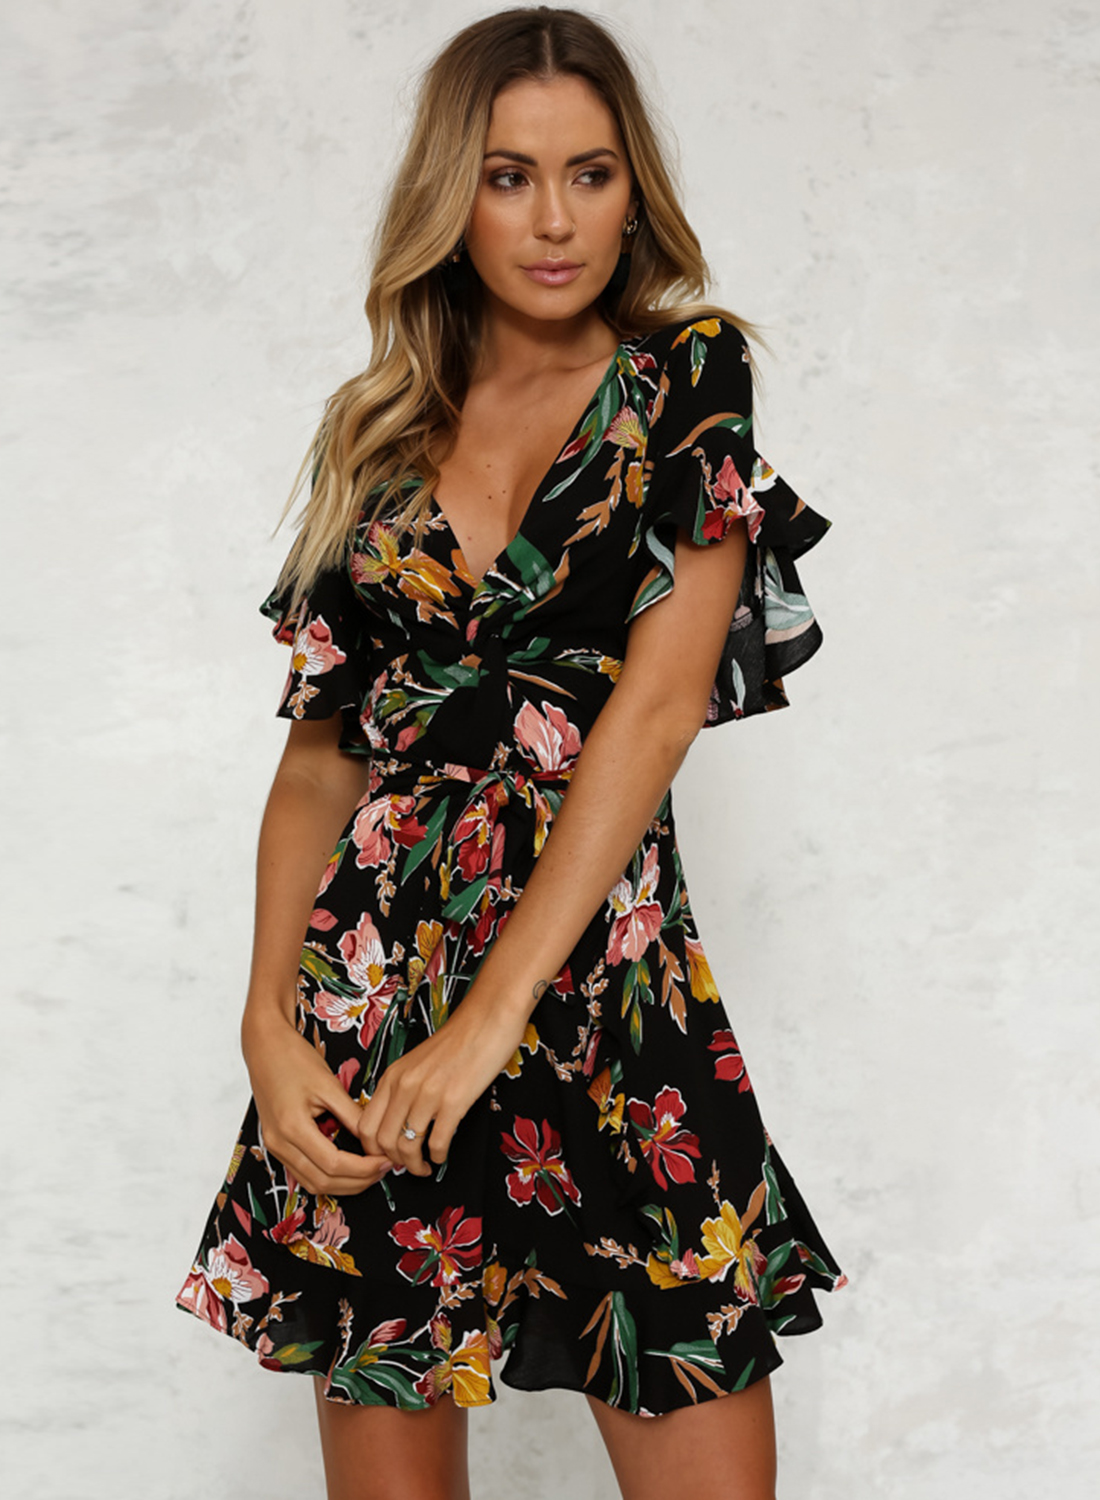 Buy > short sleeve floral dress > in stock